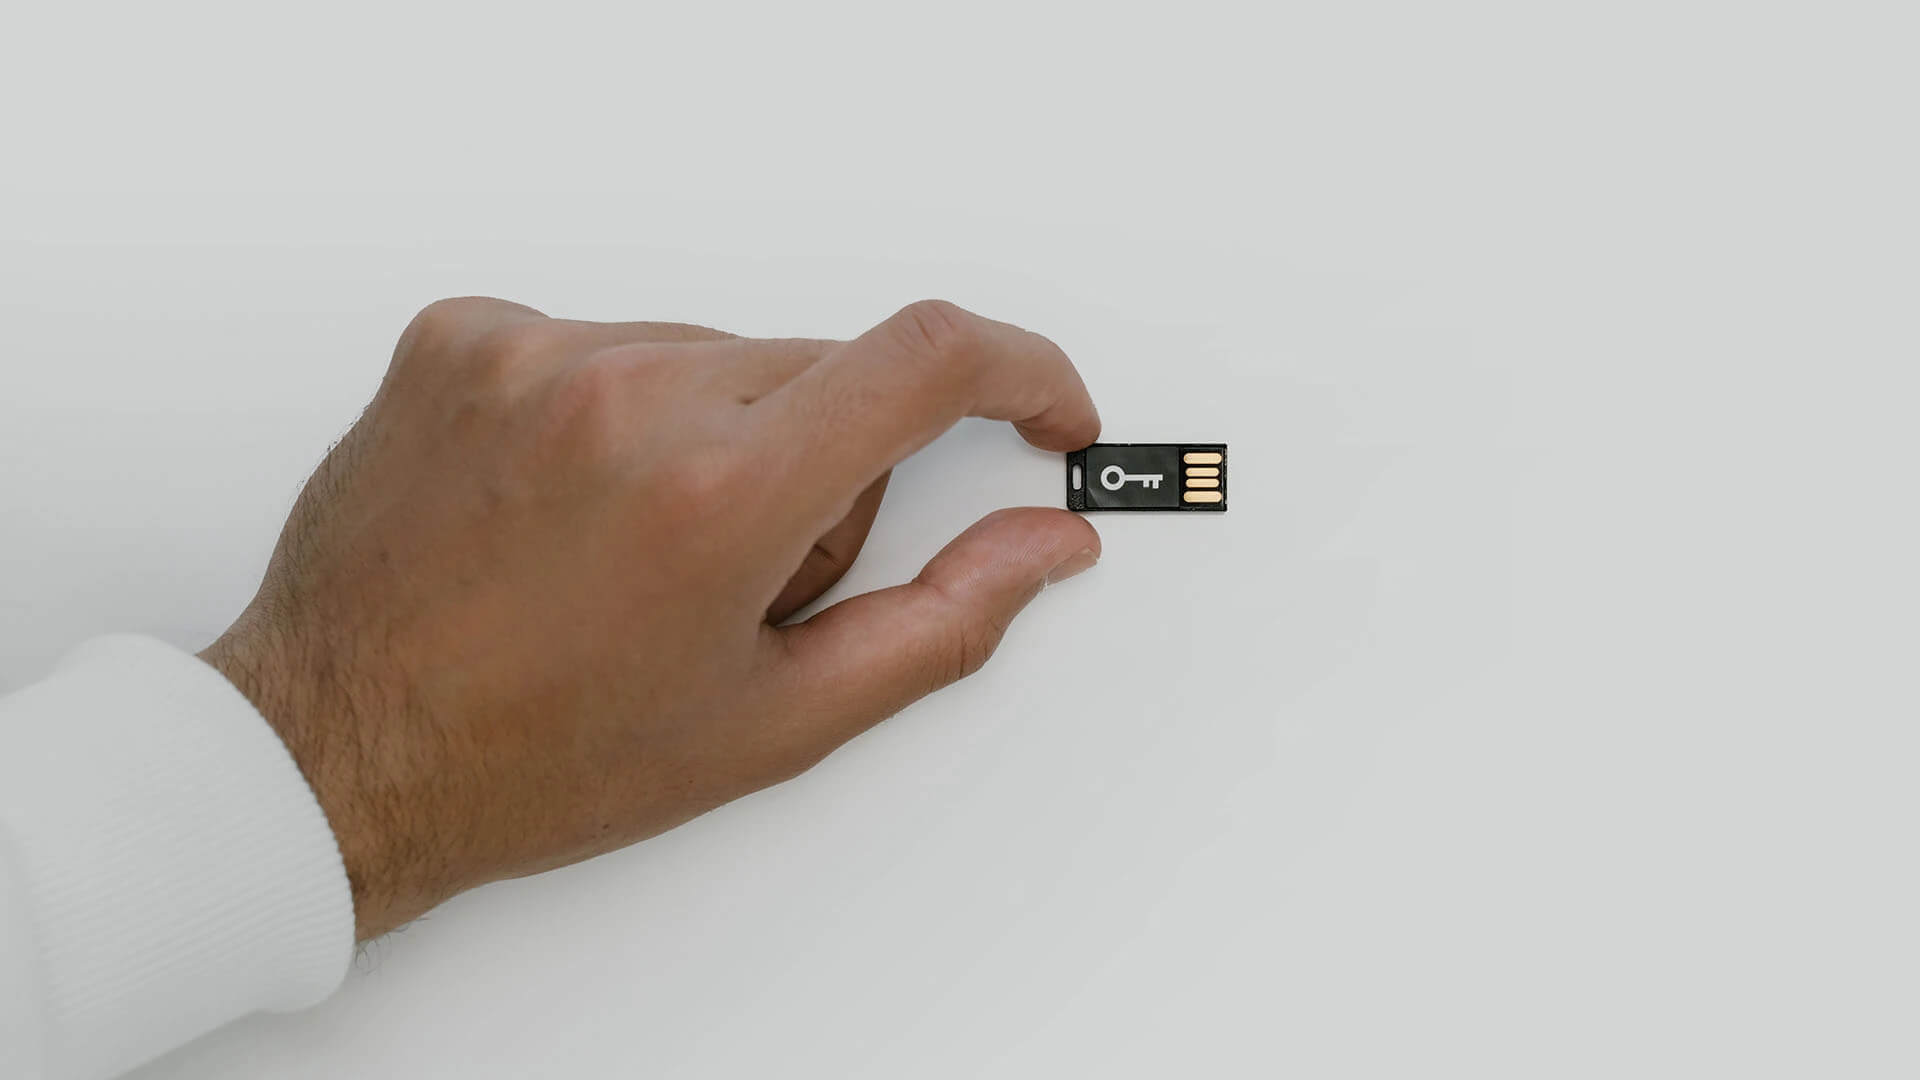 a person's hand holding a small micro sd card with a key symbol on it